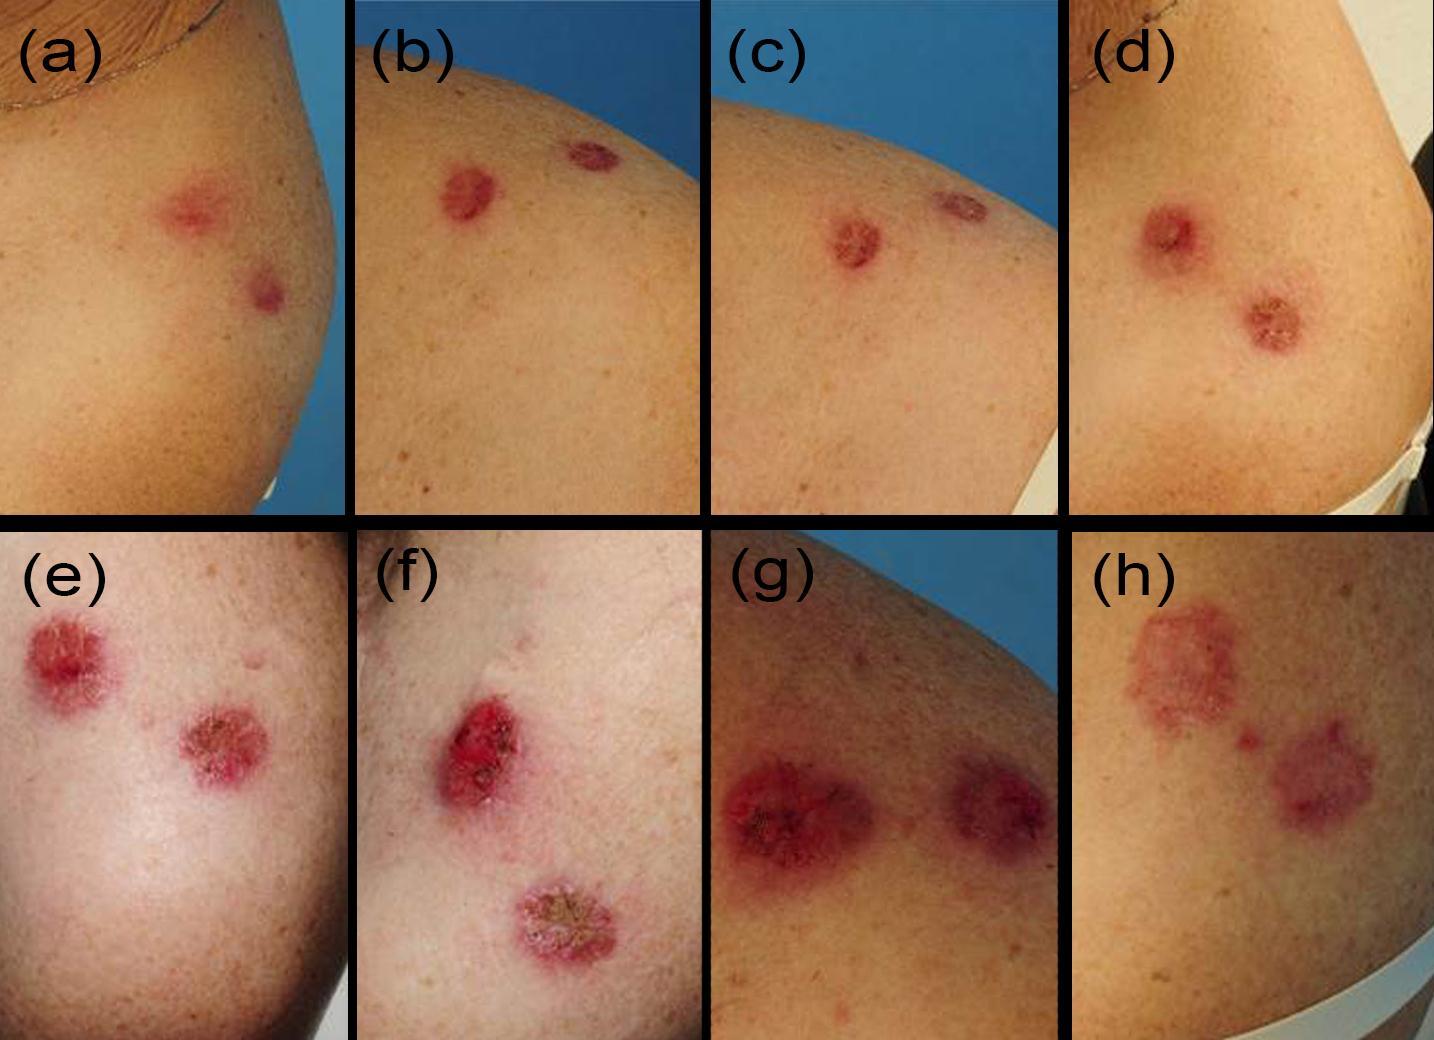  Sequence of the typical therapeutic skin reactions in an arm 3 basal cell carcinoma patient at all visits: Days 0, 2, 4, 7, 9, 11, 13, 20 (a-h)